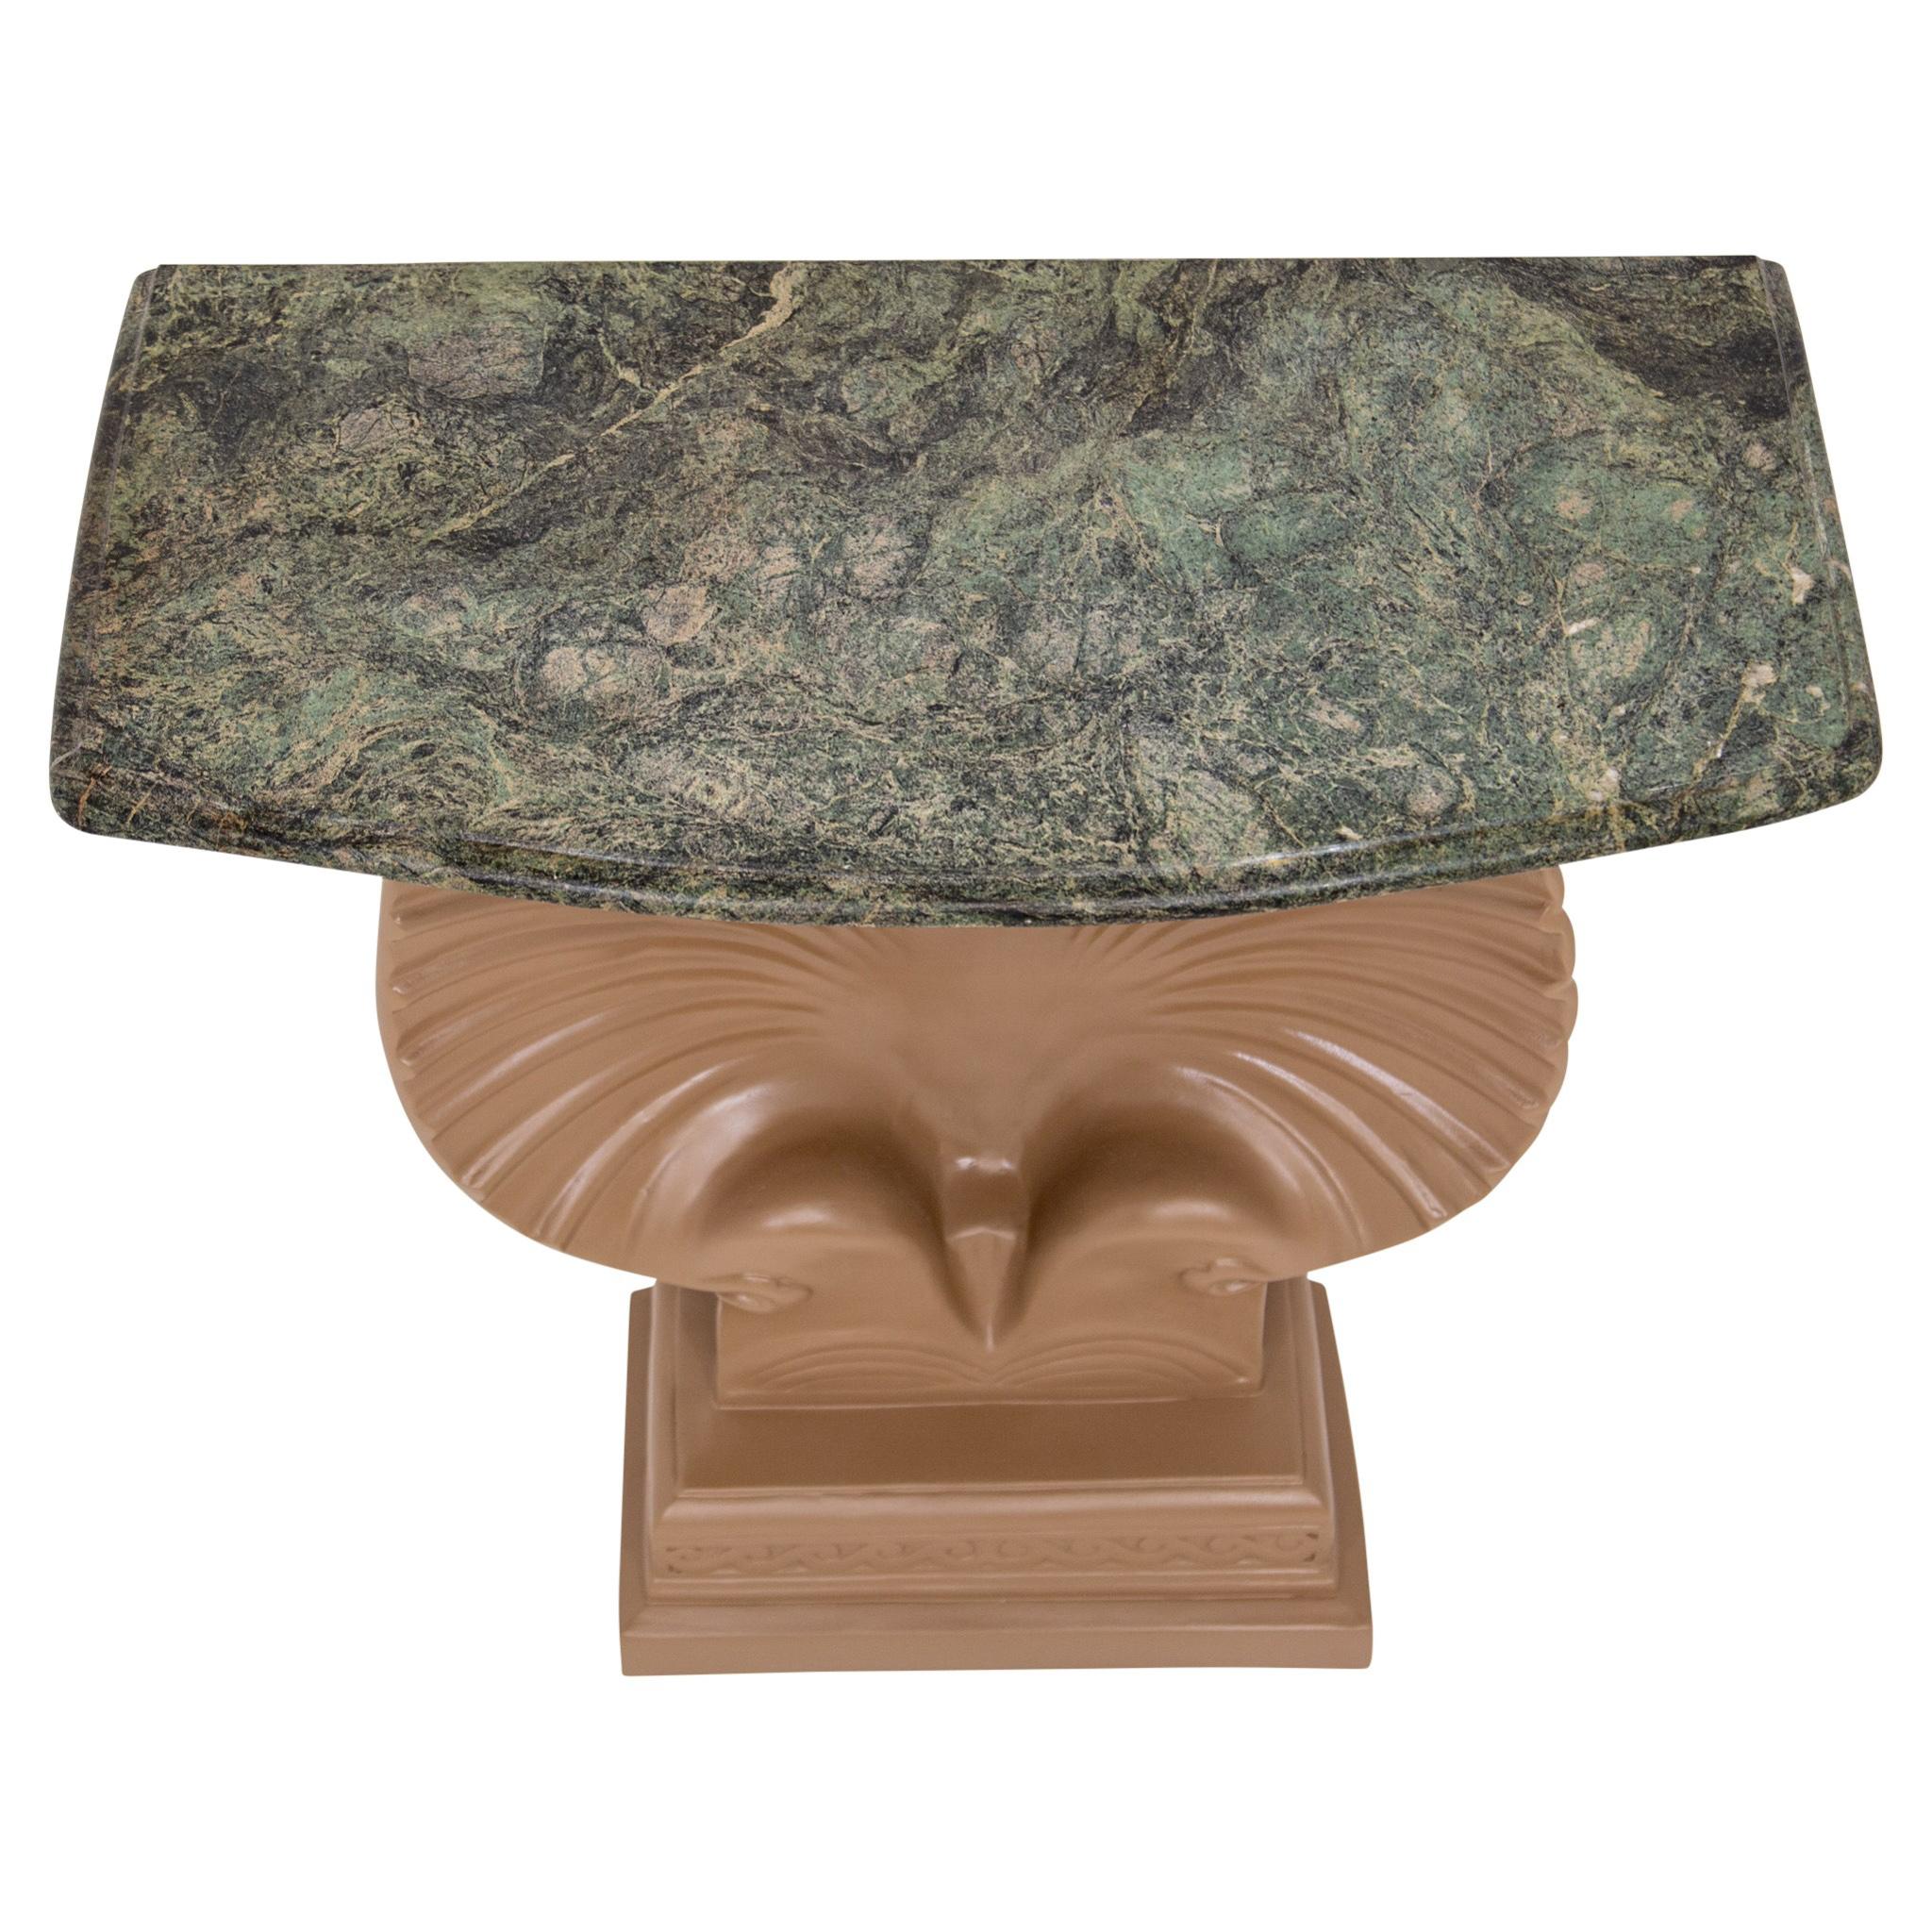 Cast Vintage Clamshell Console Table with Green Marble Top